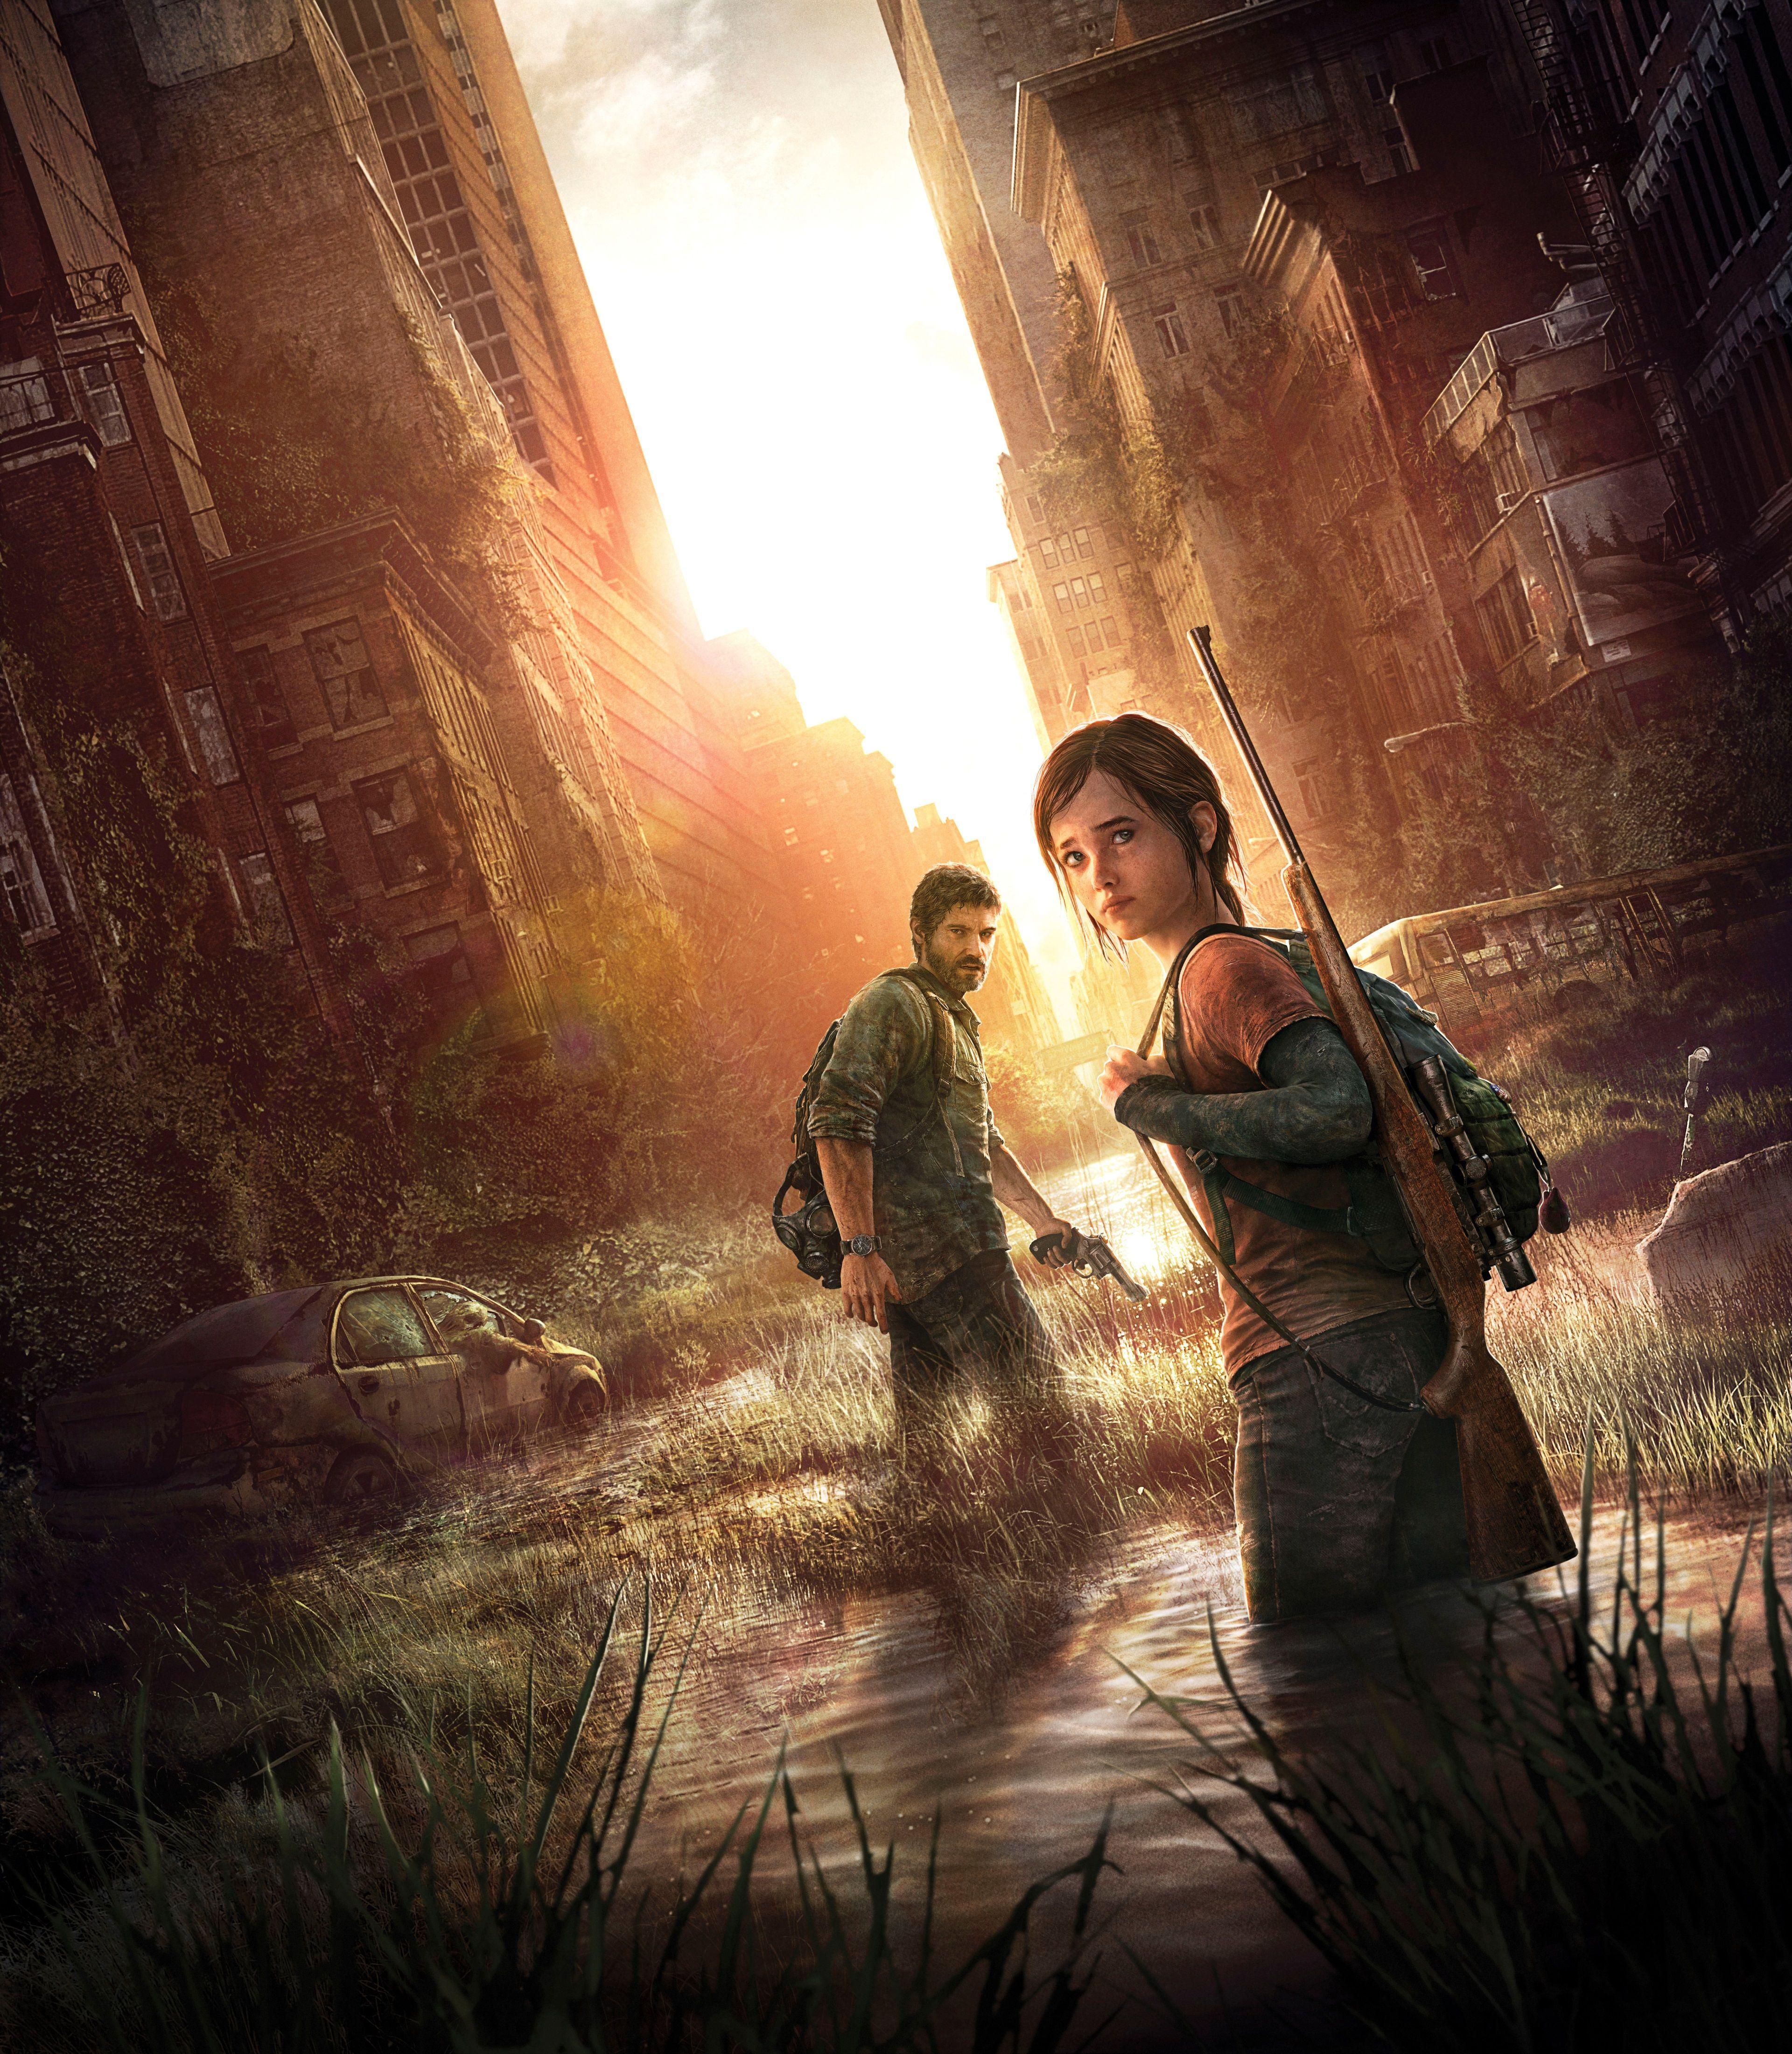 Download The Last Of Us wallpapers for mobile phone, free The